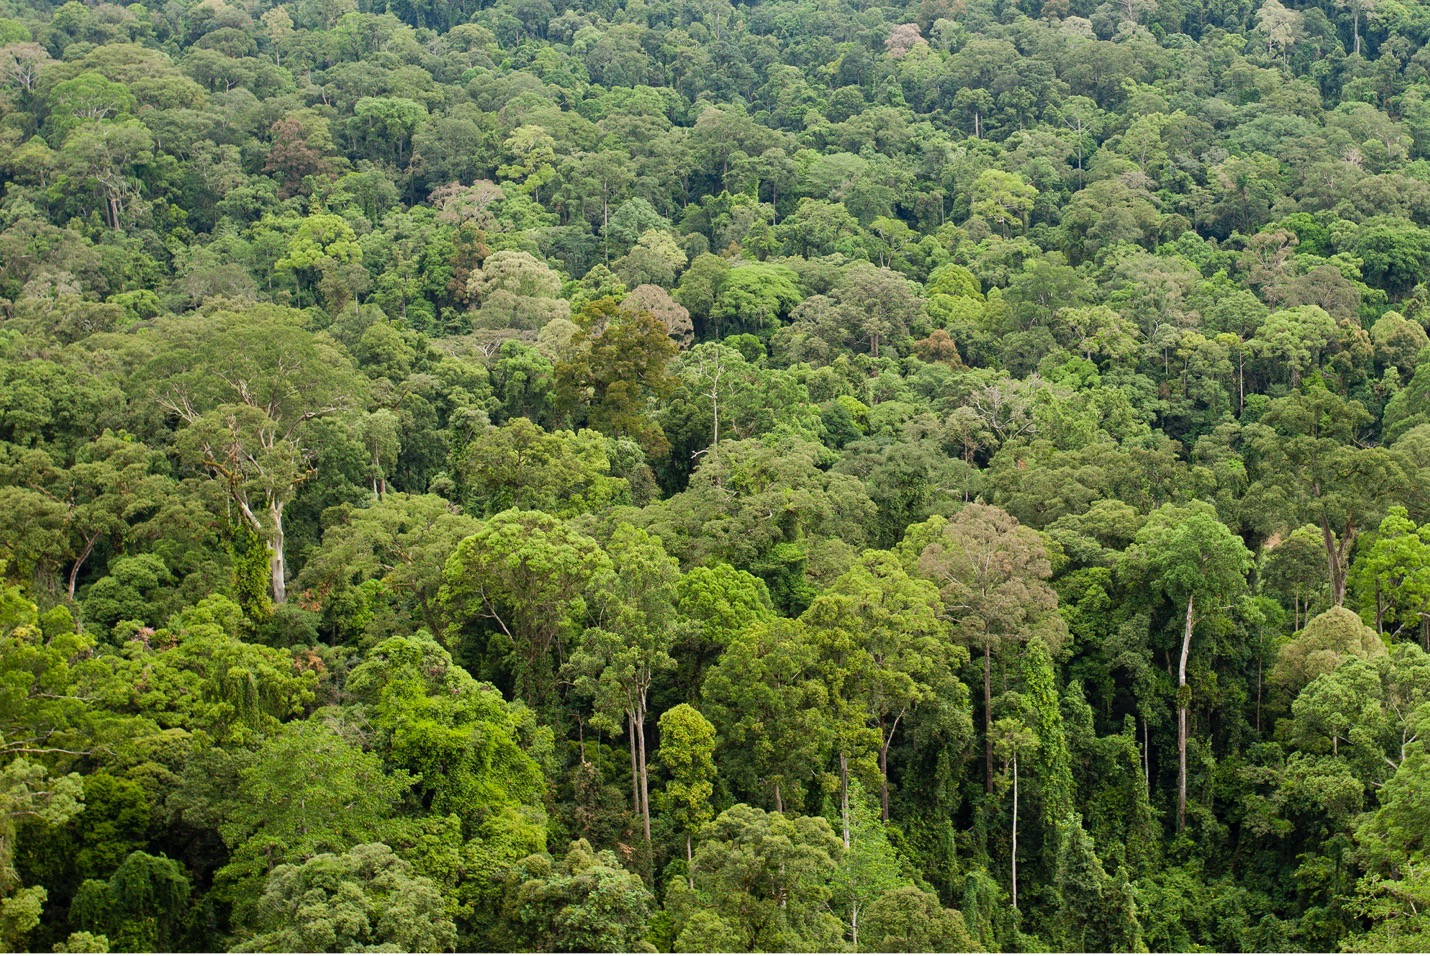 the dense borneo rainforest as a pattern of trees in the landscape